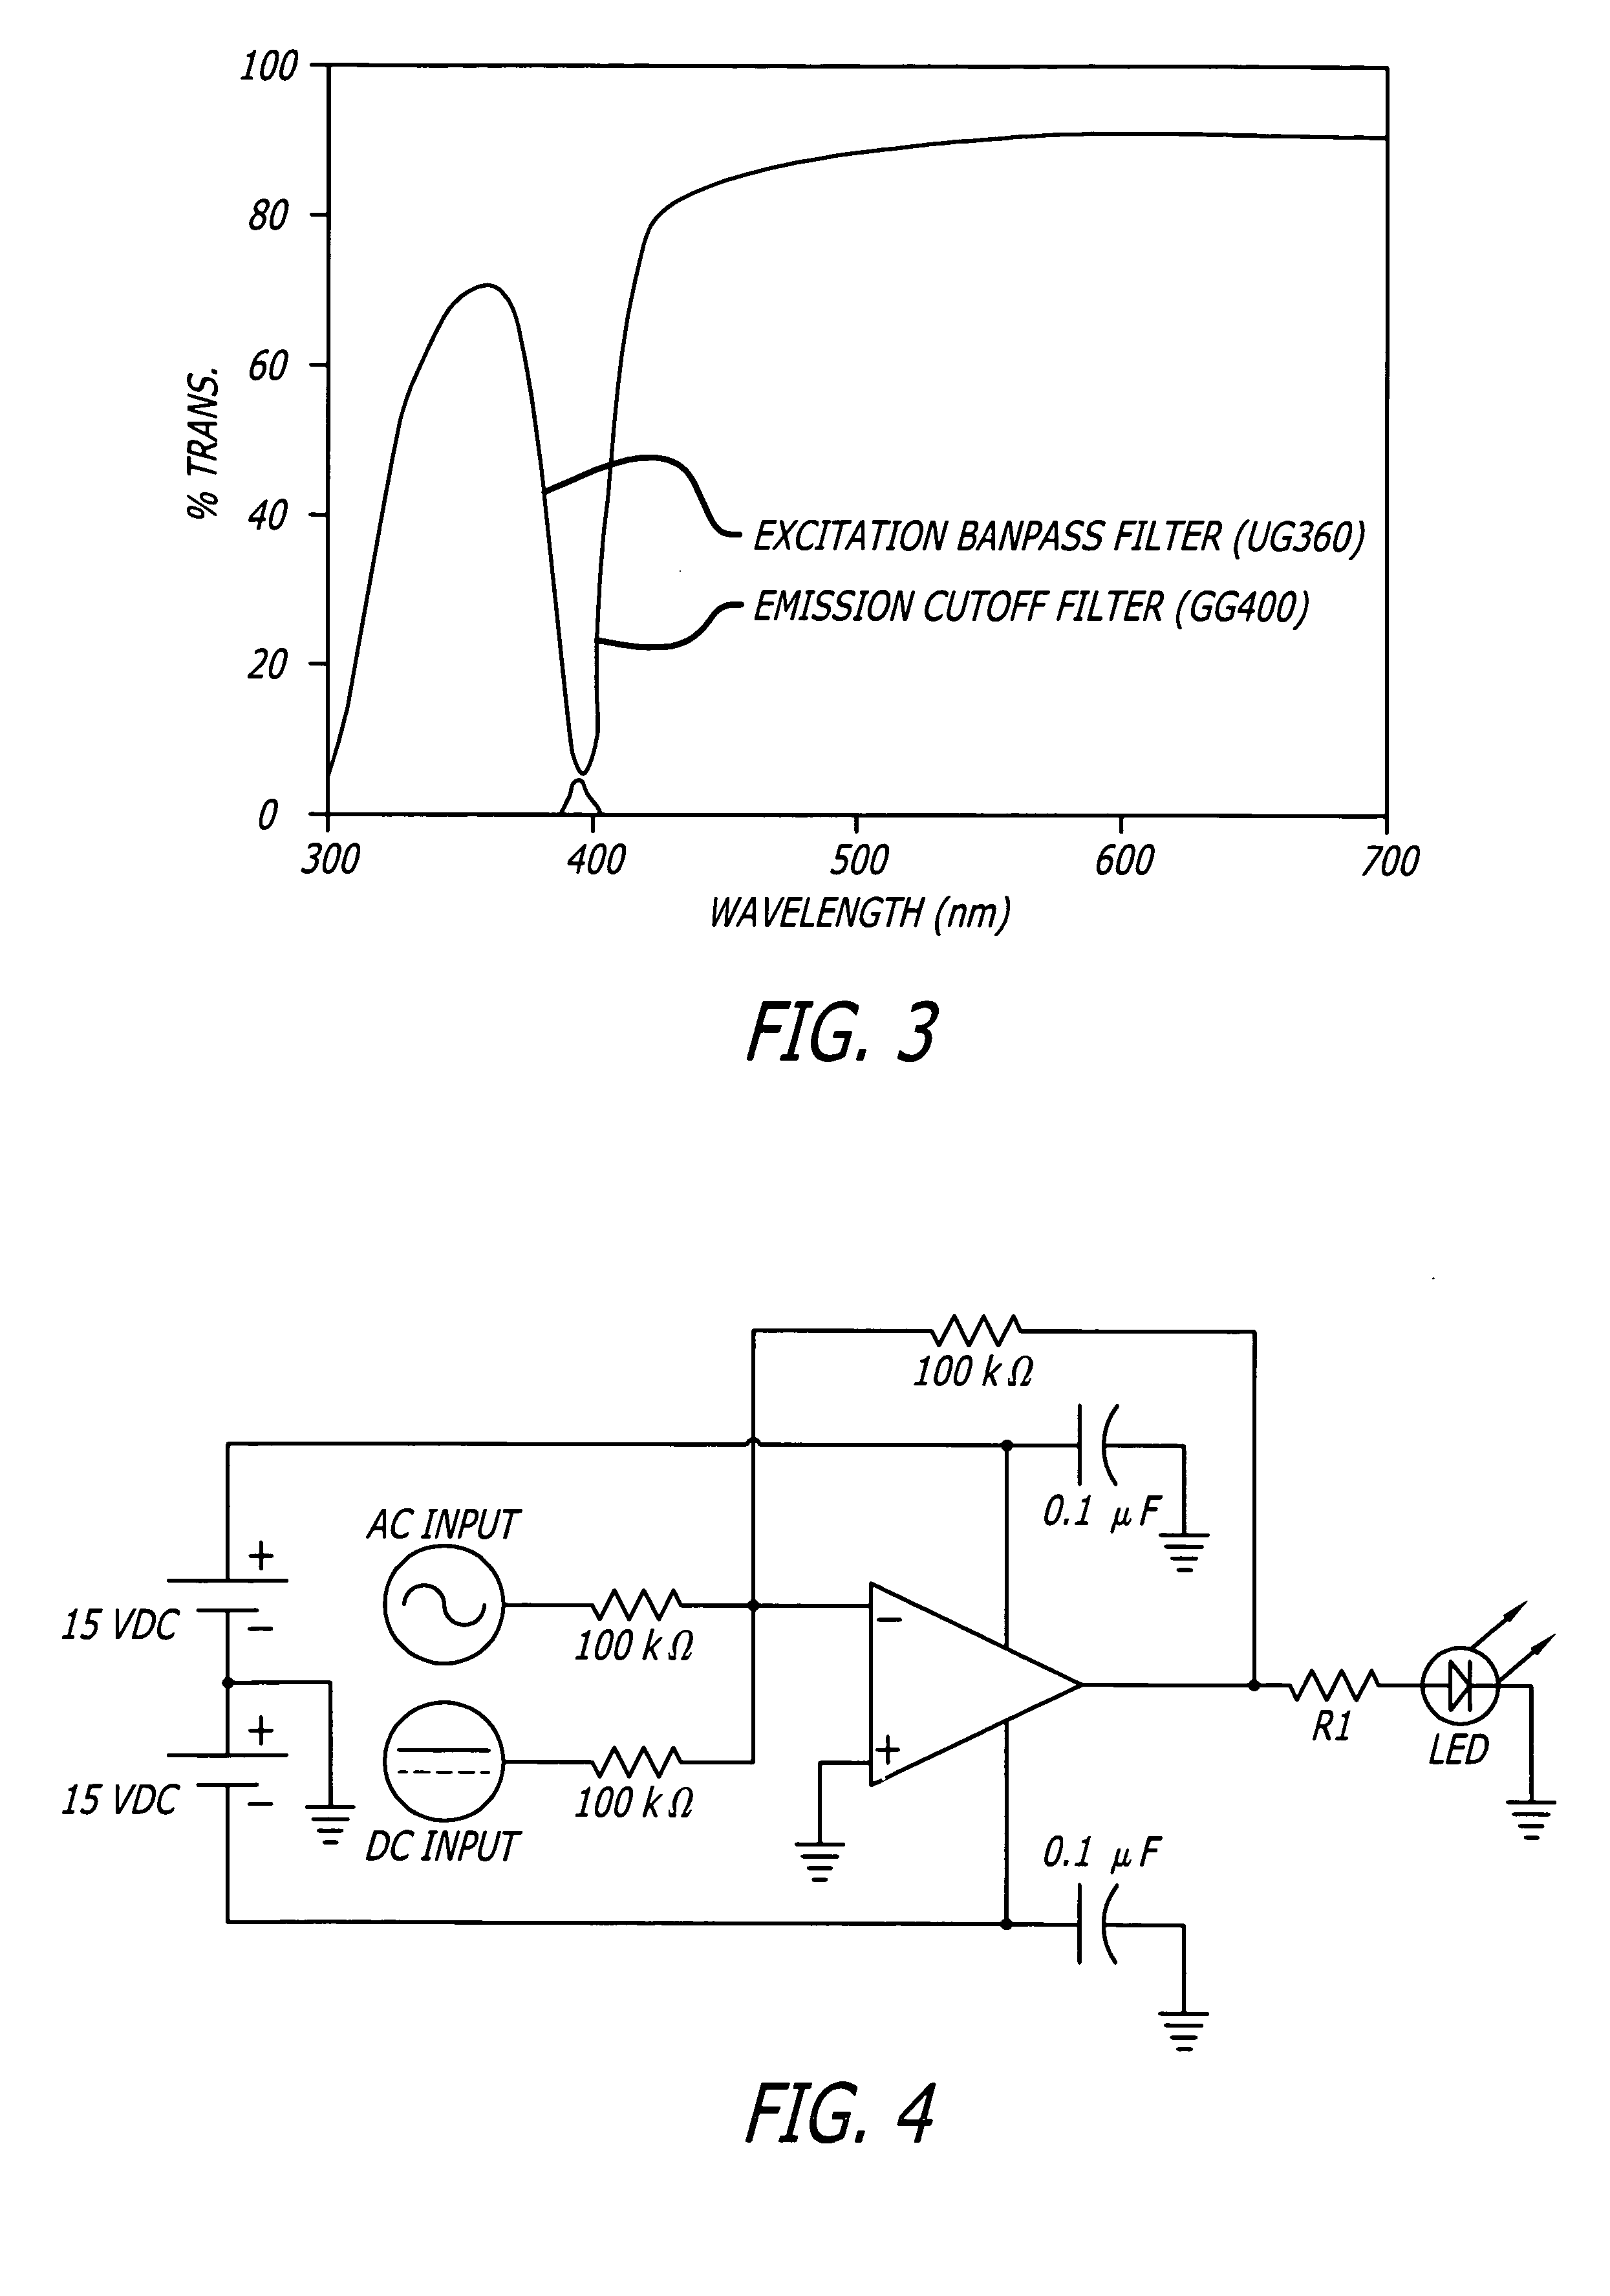 System and method for optical detection of petroleum and other products in an environment